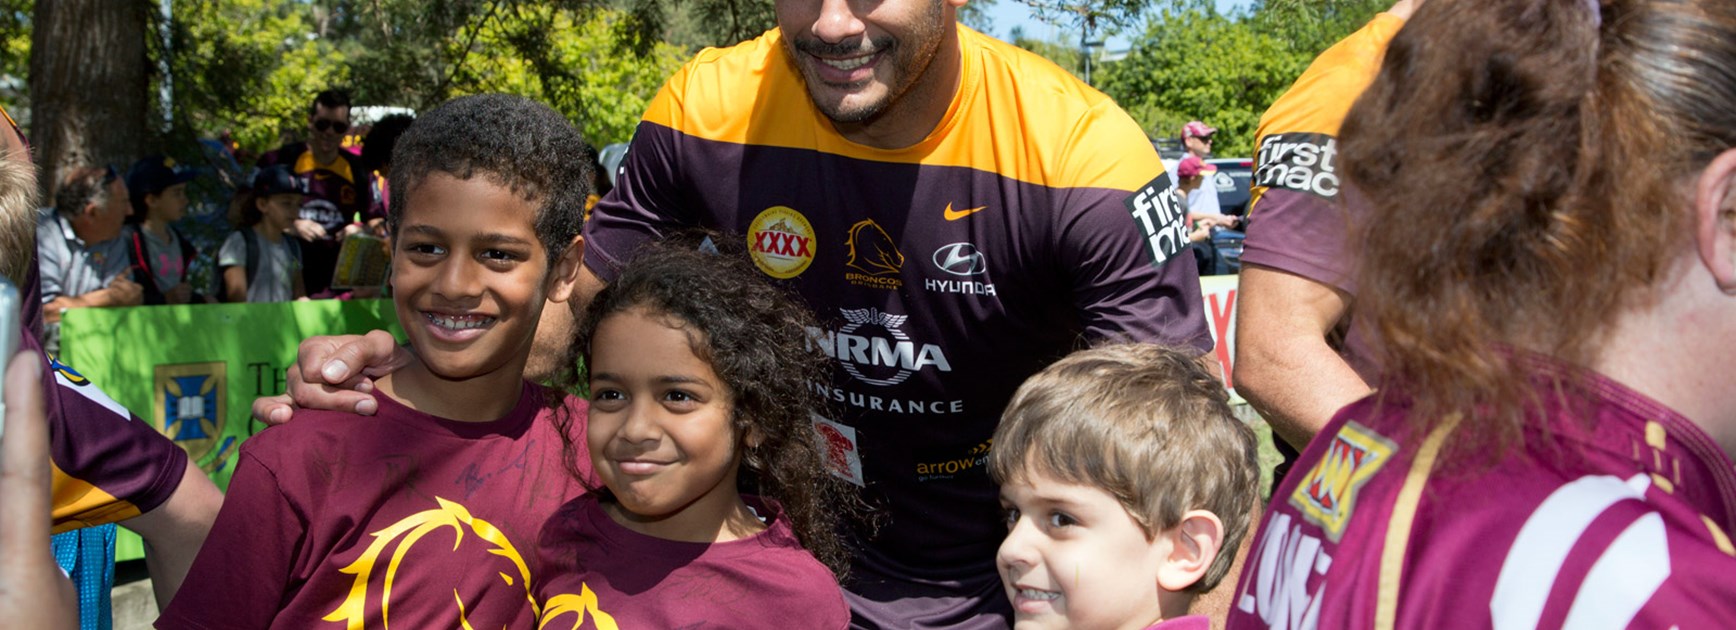 Justin Hodges poses with Broncos fans ahead of the club's home preliminary final on Friday night.